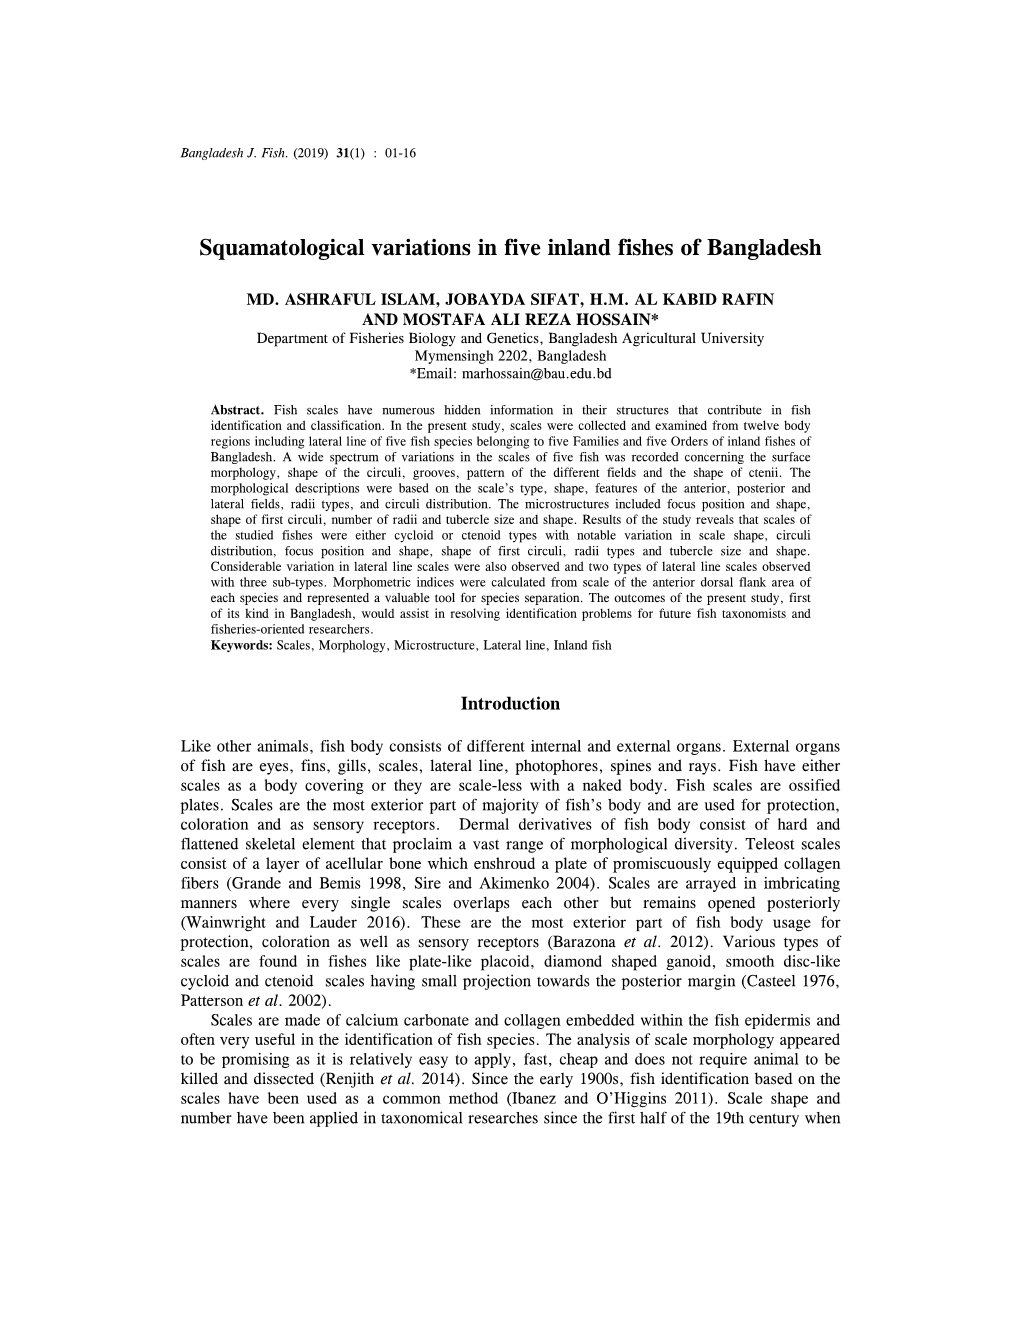 Squamatological Variations in Five Inland Fishes of Bangladesh